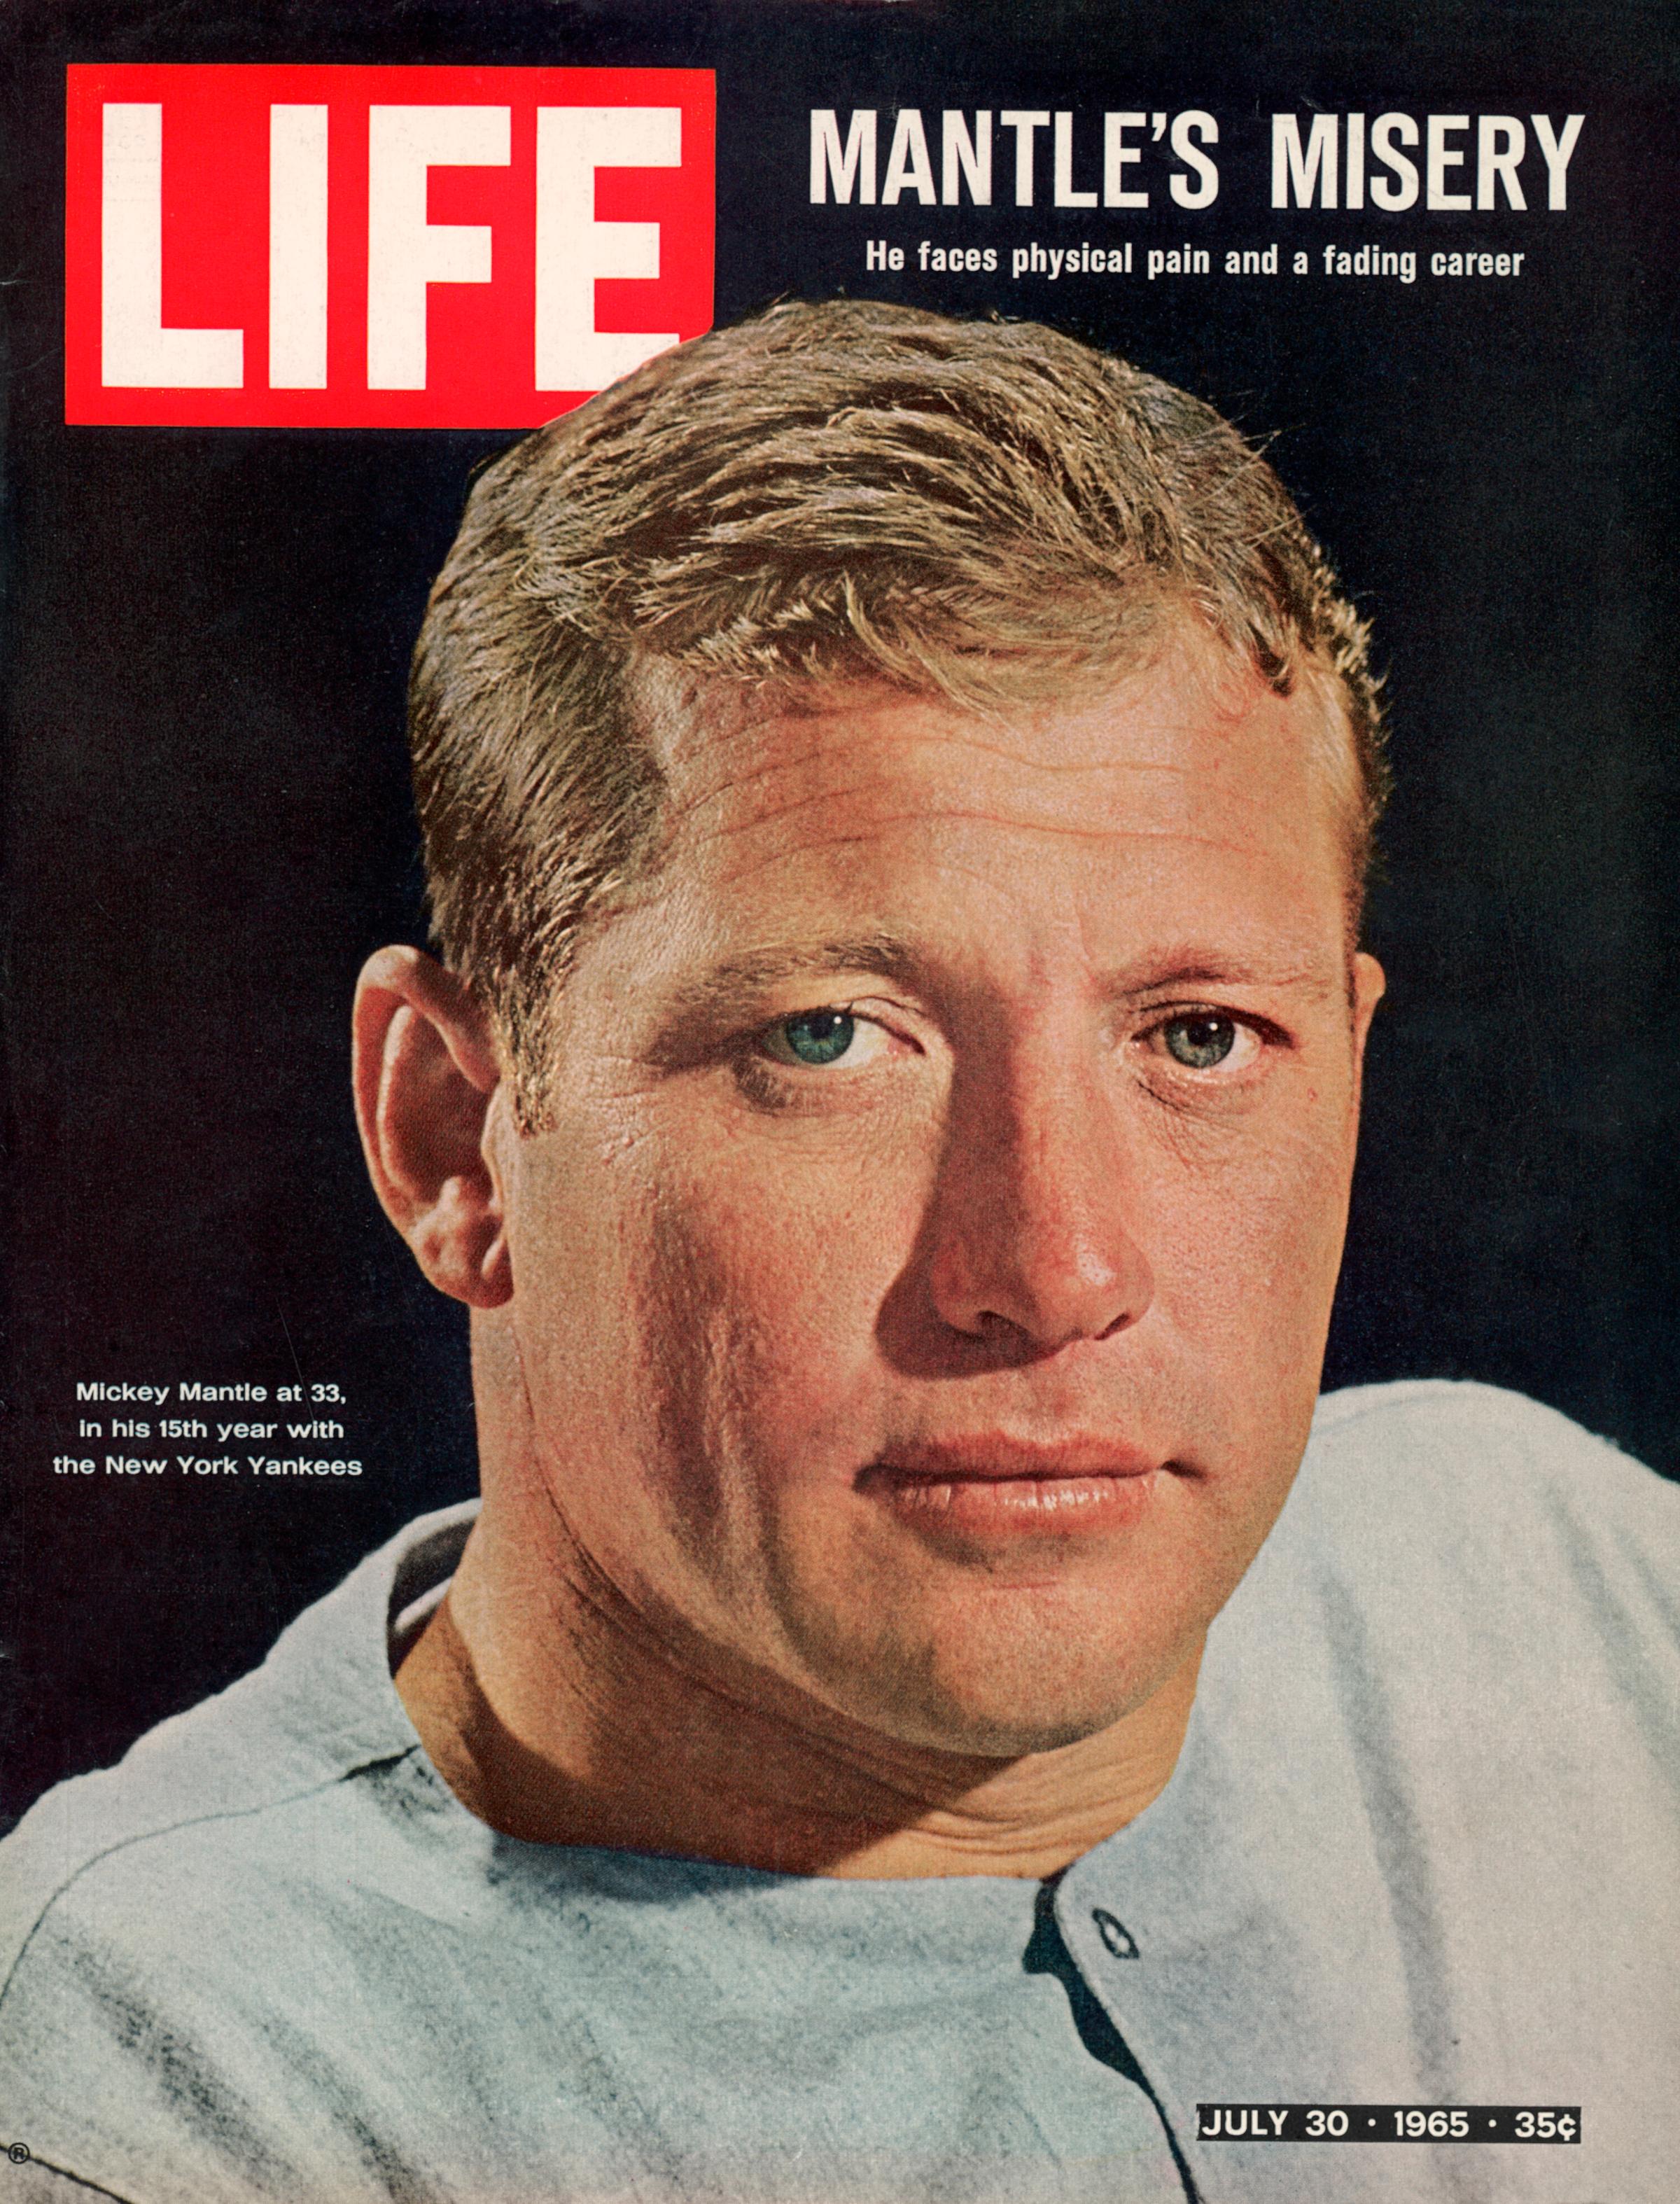 Portrait of Mickey Mantle with the text "Mantle's Misery" on the cover of LIFE Magazine, July 30, 1965